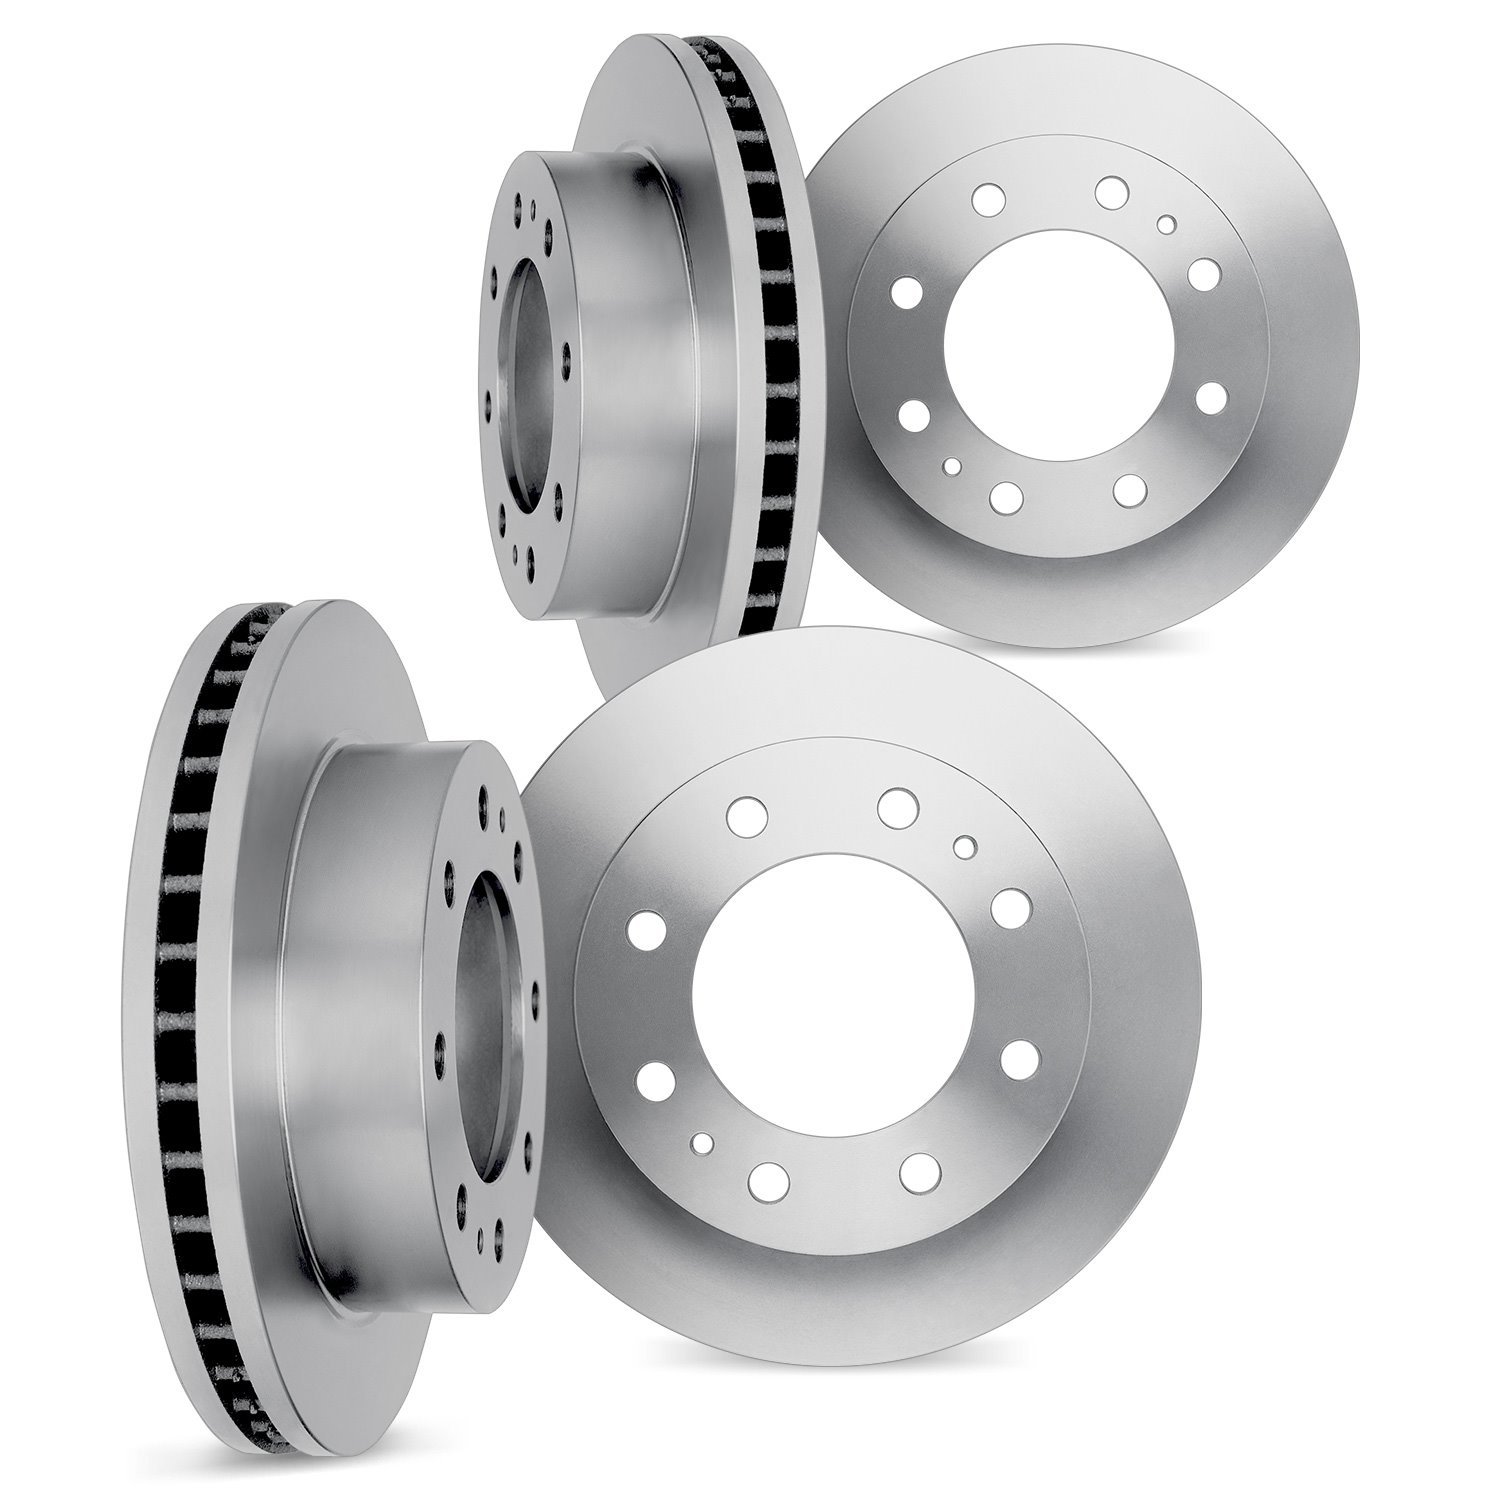 6004-40178 Brake Rotors, Fits Select Mopar, Position: Front and Rear